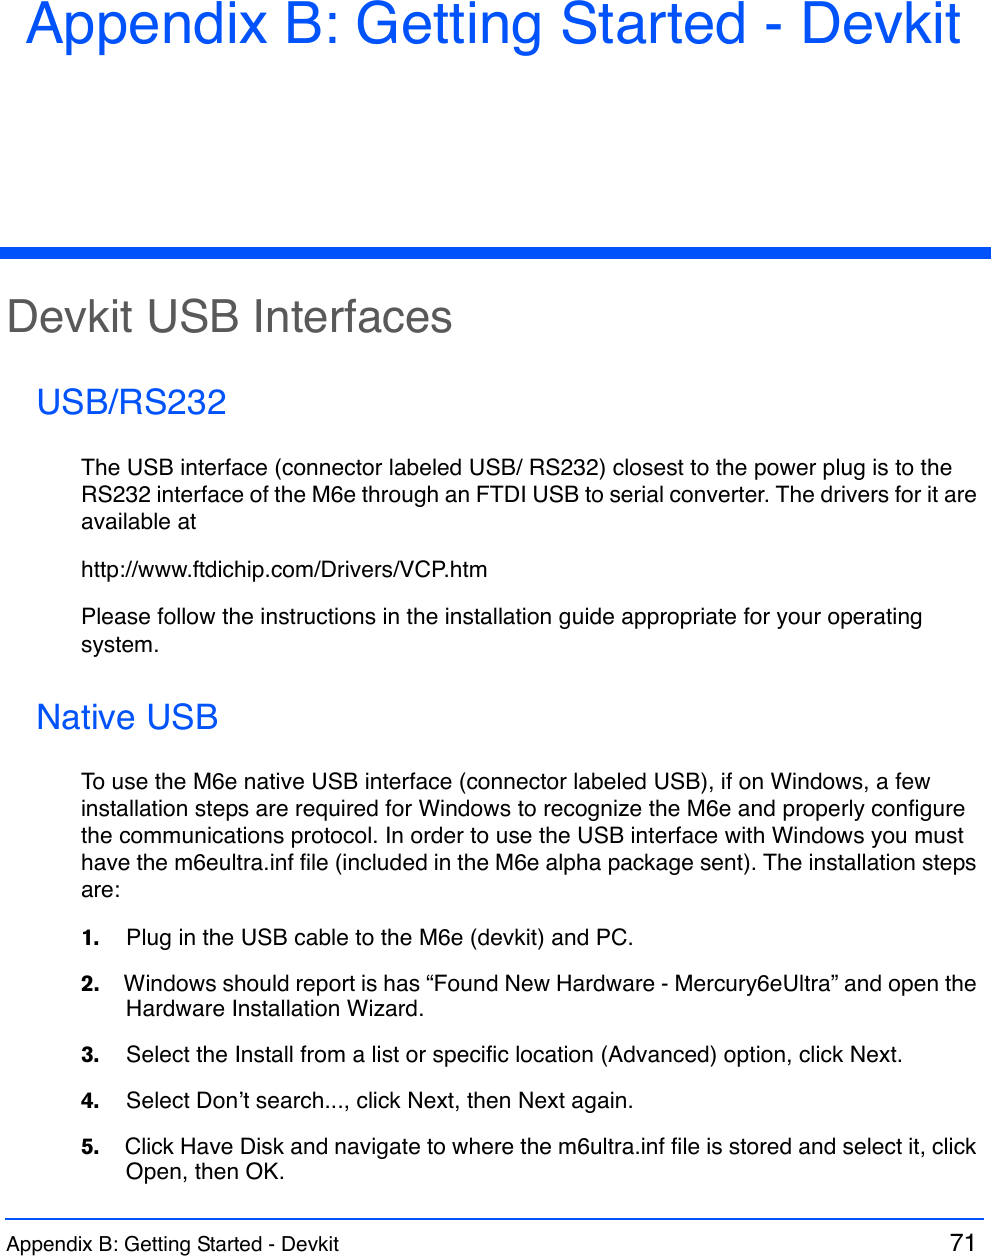 Appendix B: Getting Started - Devkit  71 Appendix B: Getting Started - DevkitDevkit USB InterfacesUSB/RS232The USB interface (connector labeled USB/ RS232) closest to the power plug is to the RS232 interface of the M6e through an FTDI USB to serial converter. The drivers for it are available athttp://www.ftdichip.com/Drivers/VCP.htmPlease follow the instructions in the installation guide appropriate for your operating system.Native USBTo use the M6e native USB interface (connector labeled USB), if on Windows, a few installation steps are required for Windows to recognize the M6e and properly configure the communications protocol. In order to use the USB interface with Windows you must have the m6eultra.inf file (included in the M6e alpha package sent). The installation steps are:1.    Plug in the USB cable to the M6e (devkit) and PC.2.    Windows should report is has “Found New Hardware - Mercury6eUltra” and open the Hardware Installation Wizard.3.    Select the Install from a list or specific location (Advanced) option, click Next.4.    Select Don’t search..., click Next, then Next again. 5.    Click Have Disk and navigate to where the m6ultra.inf file is stored and select it, click Open, then OK.